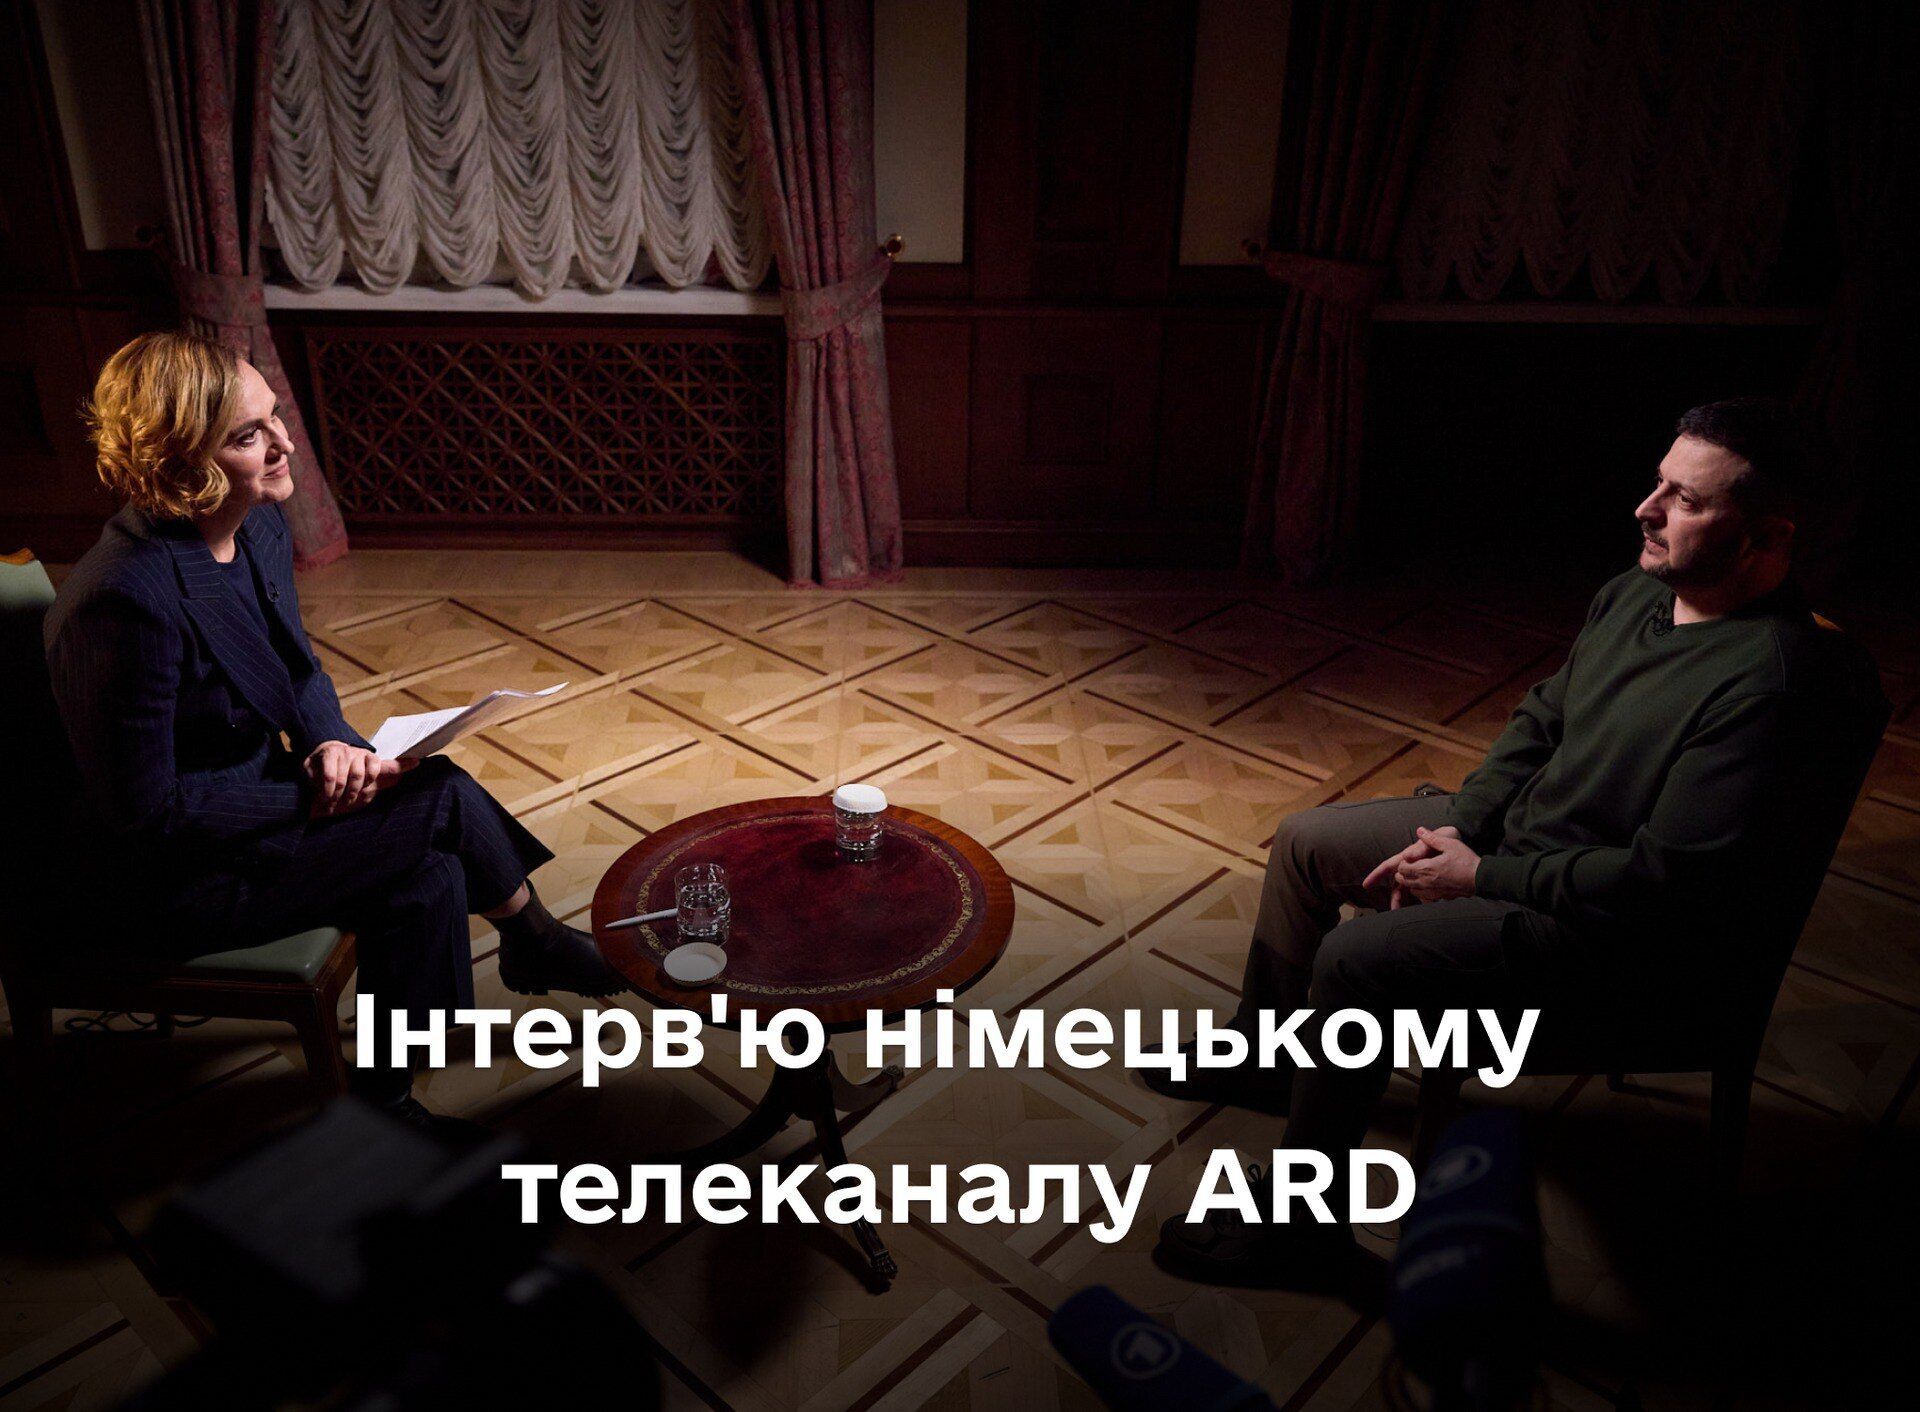 New interview with the President of Ukraine